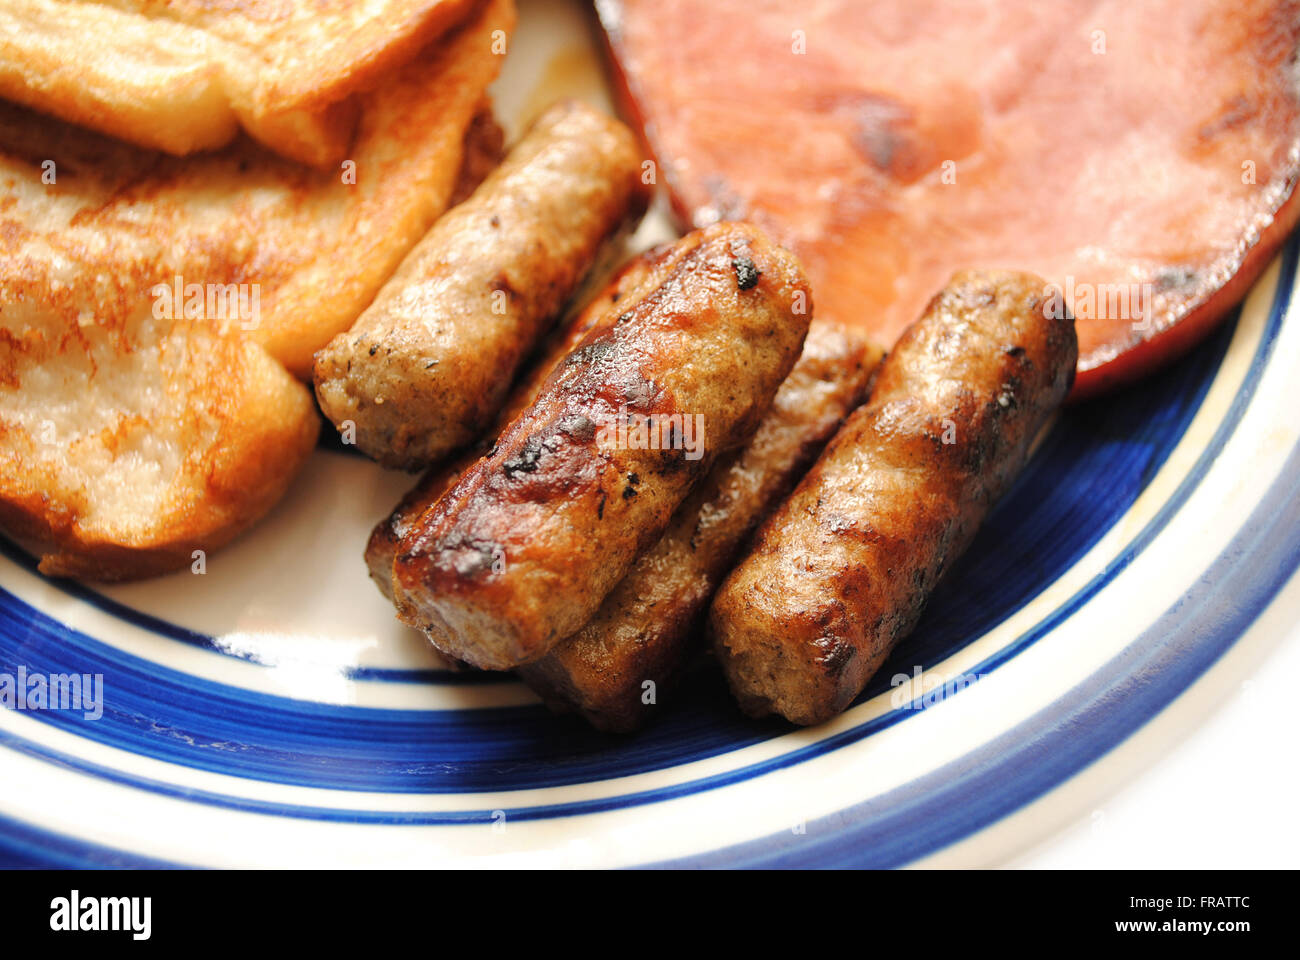 Breakfast Sausage Served as a Side Dish Stock Photo